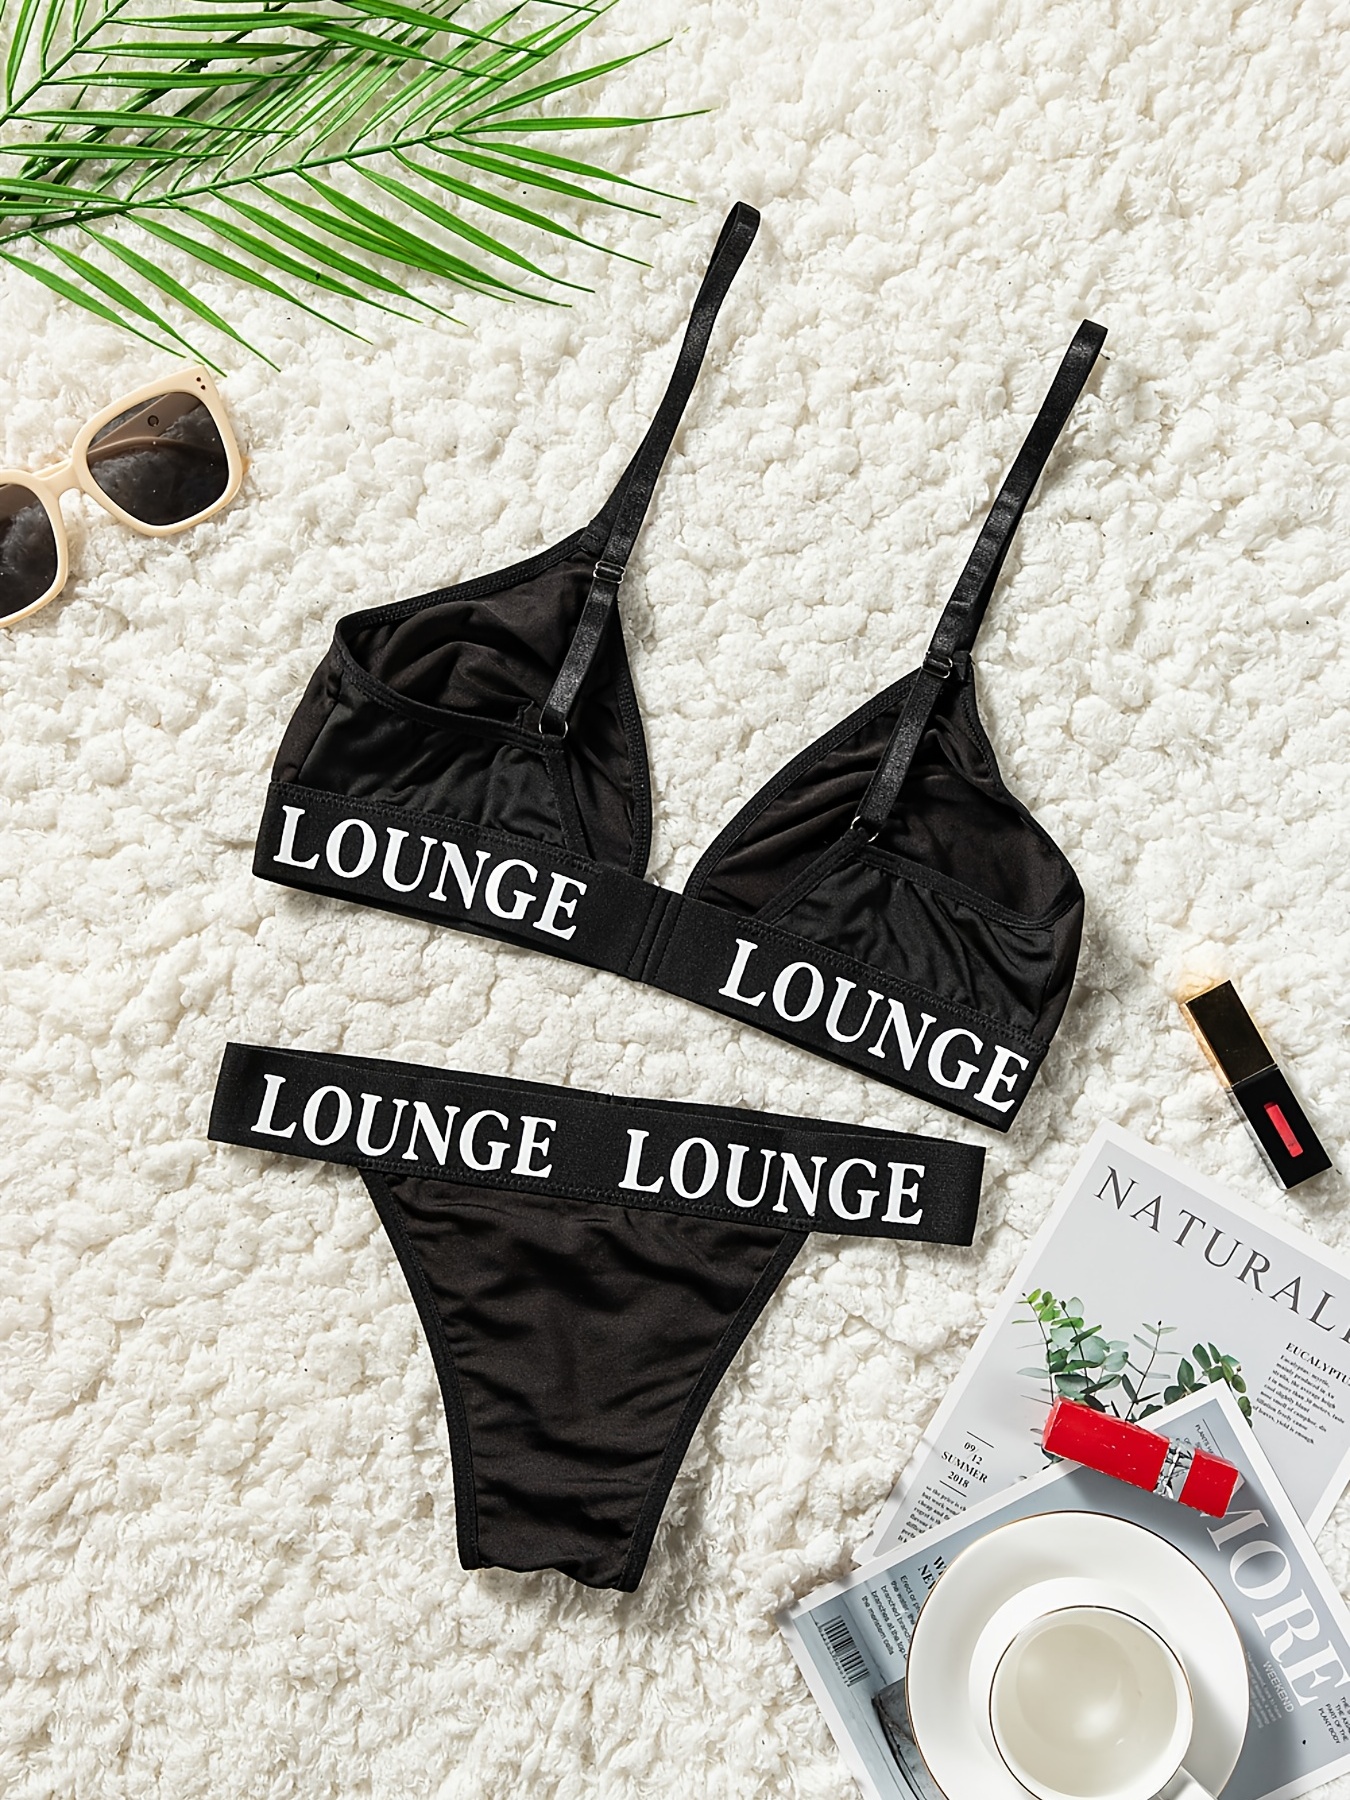 LOUNGE UNDERWEAR SET Bamboo Triange Bra And Thong Black And White